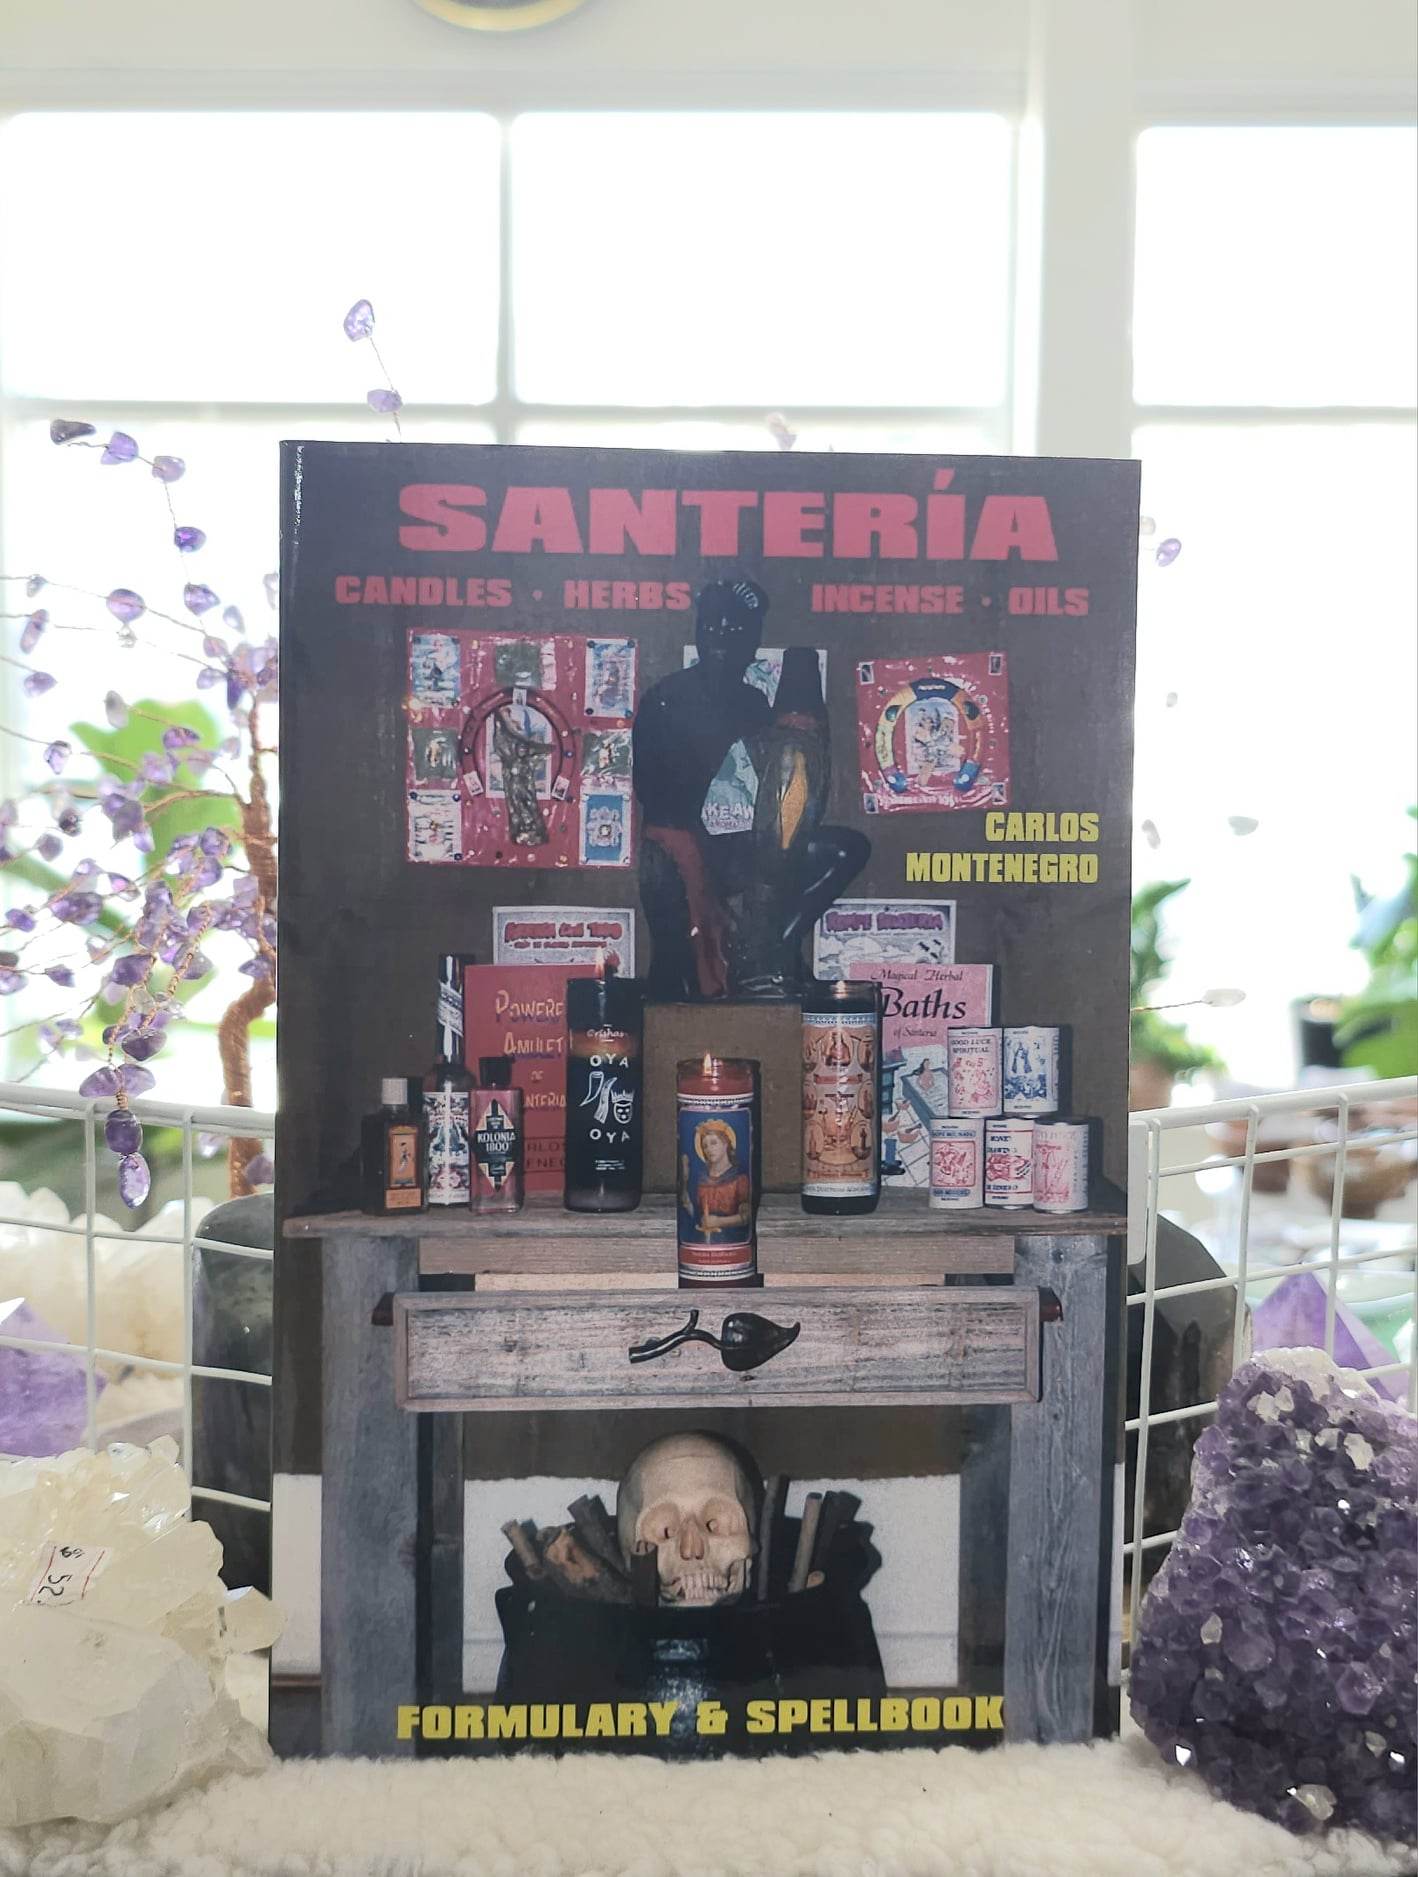 Santeria Candles, Herbs, Incense, and Oils